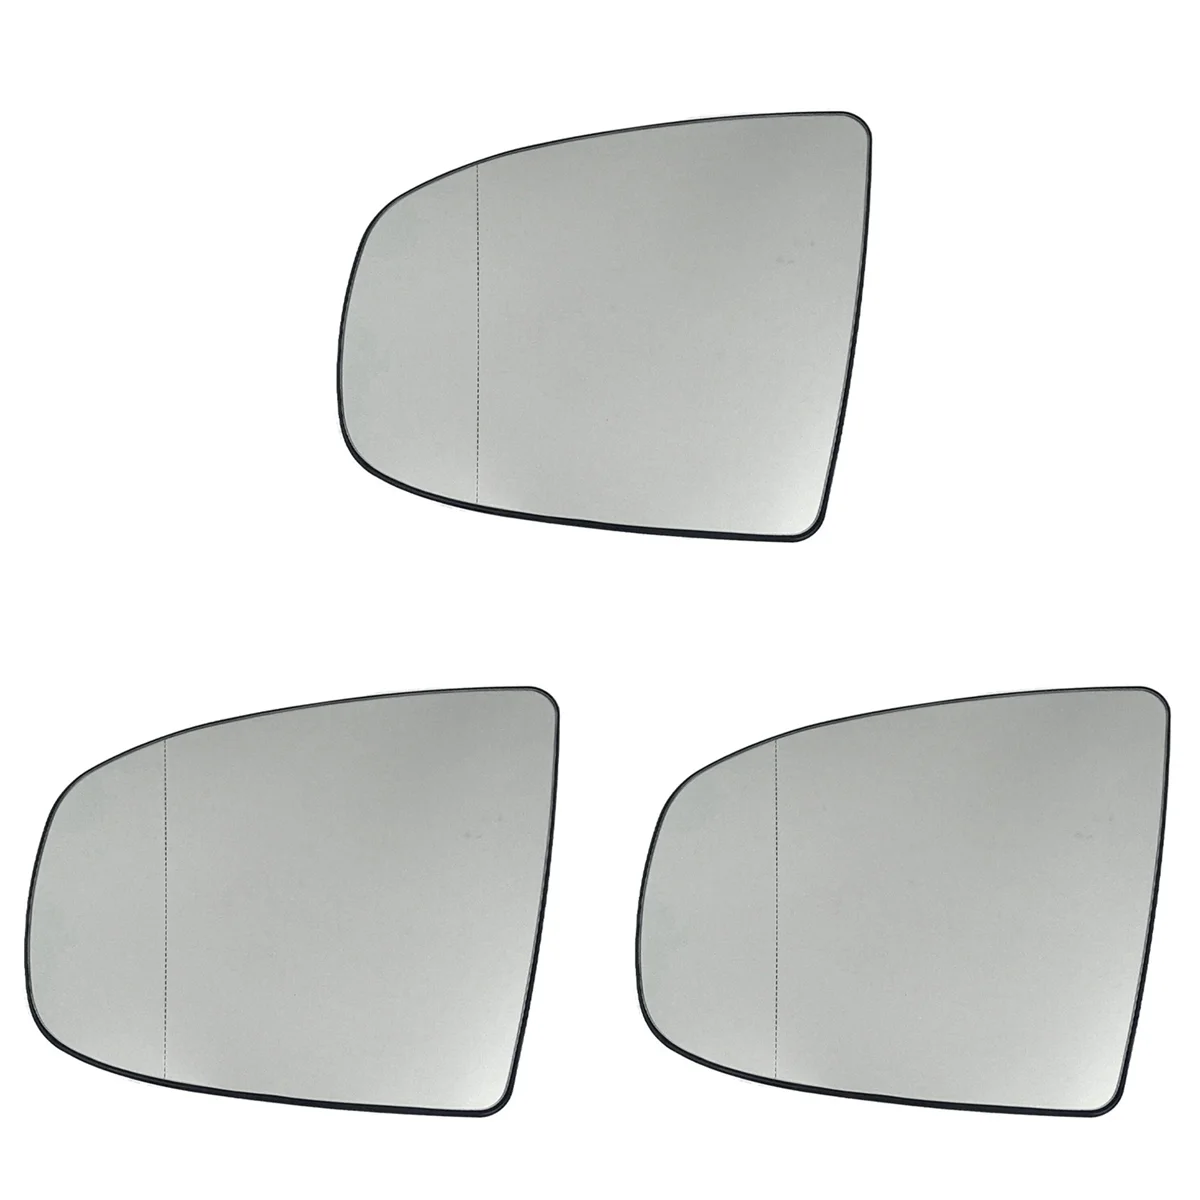 

3X Left Side Rear View Mirror Side Mirror Glass Heated + Adjustment for BMW X5 E70 2007-2013 X6 E71 E72 2008-2014